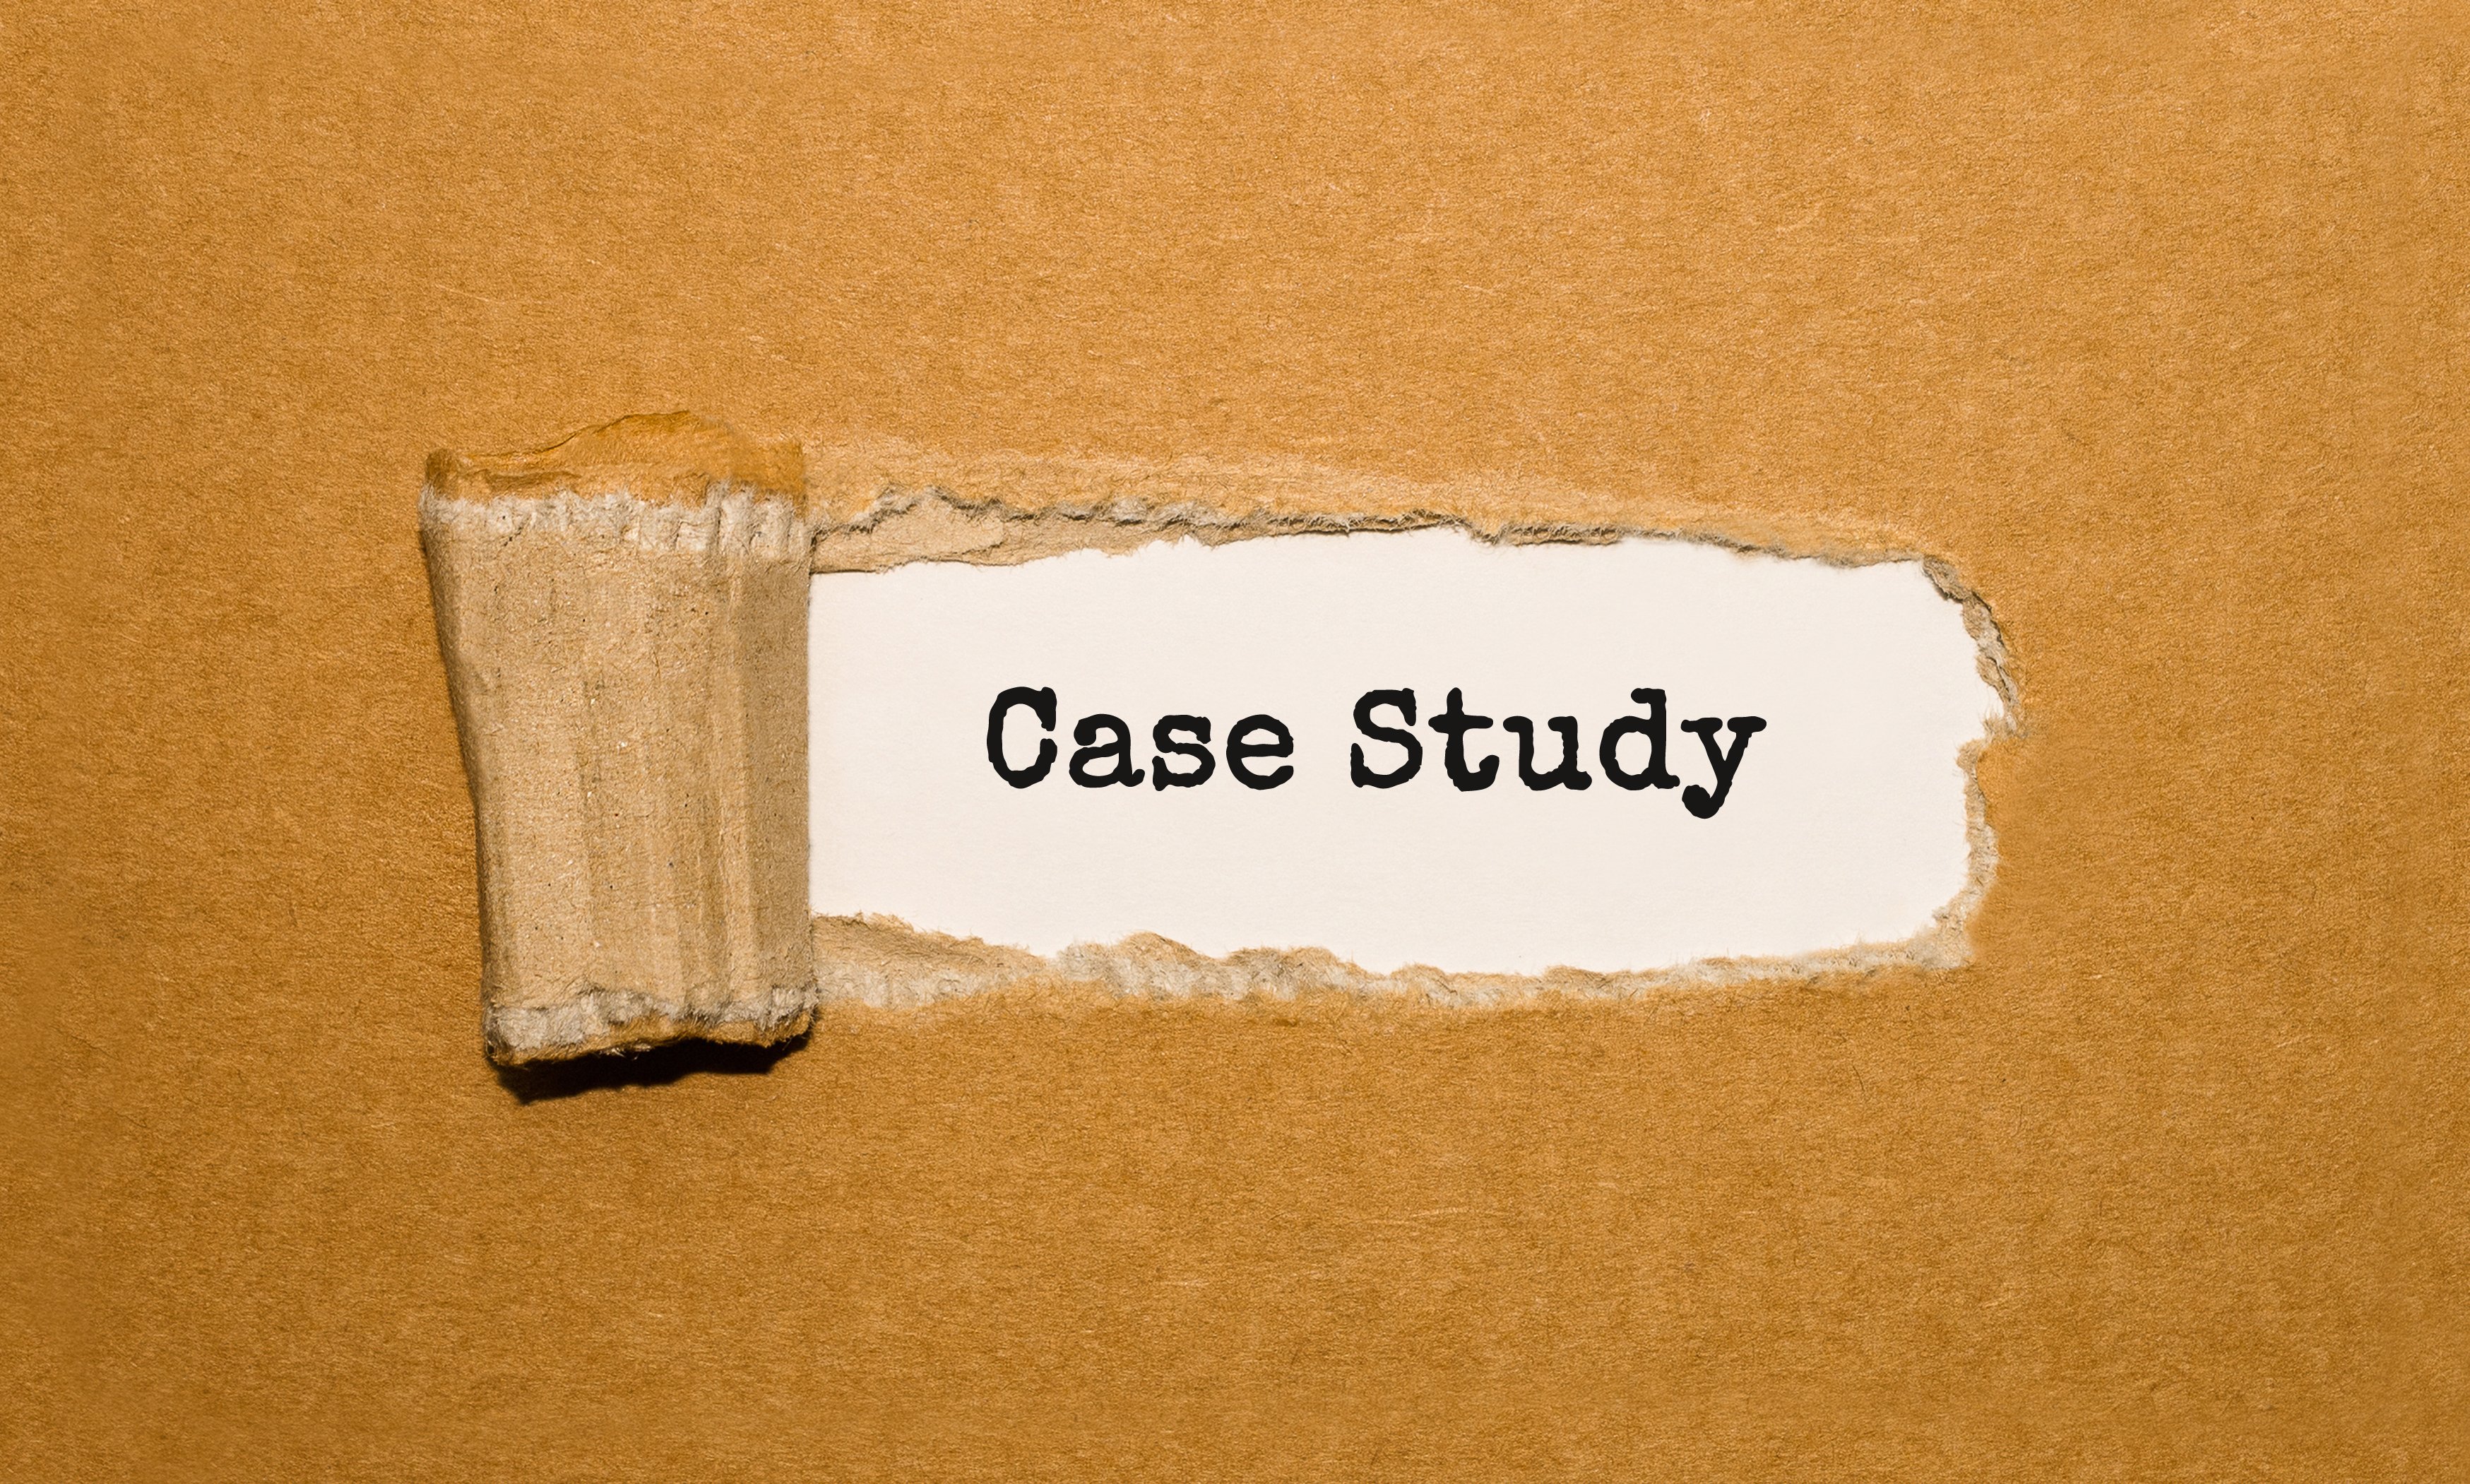 tips for case study